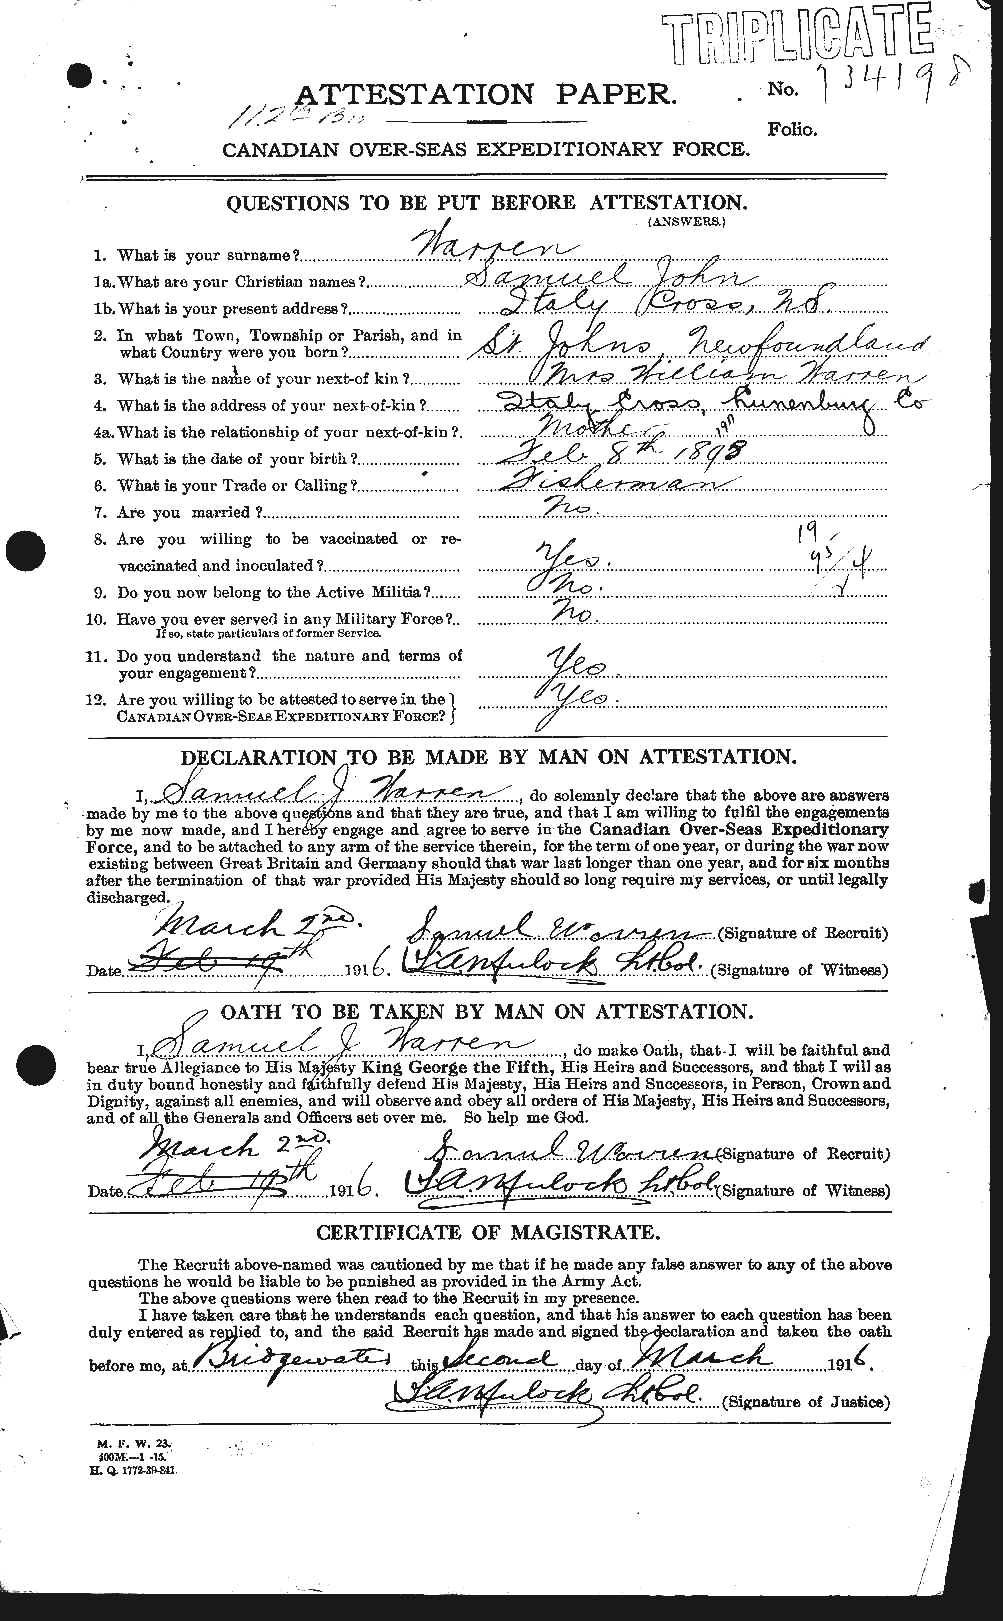 Personnel Records of the First World War - CEF 658633a